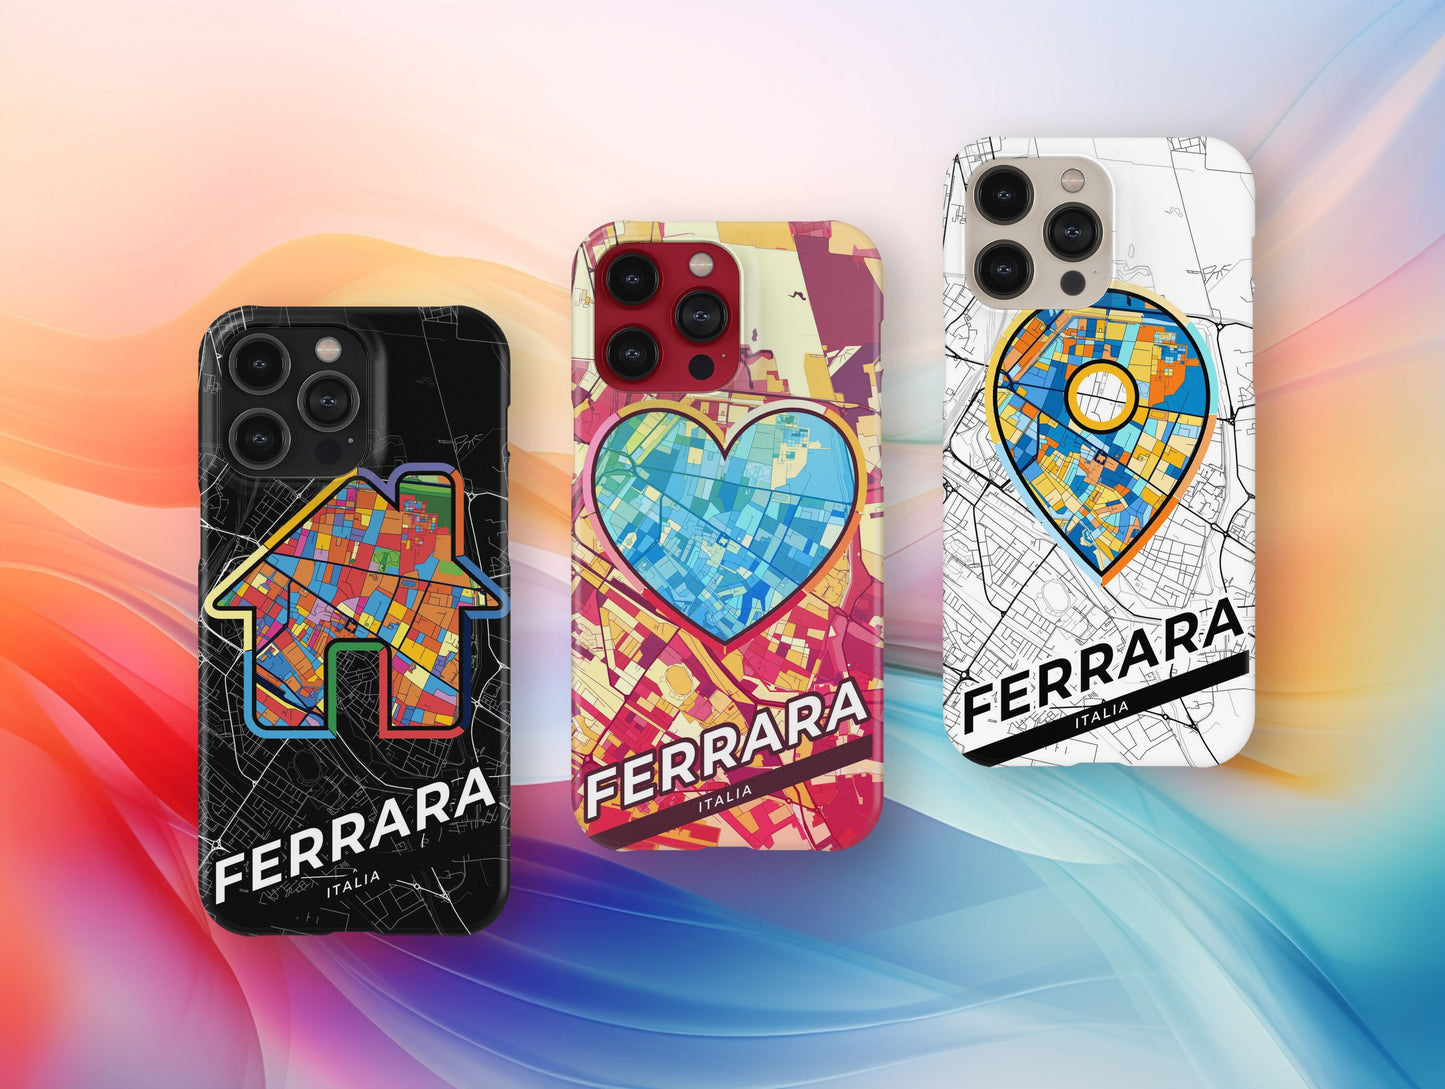 Ferrara Italy slim phone case with colorful icon. Birthday, wedding or housewarming gift. Couple match cases.